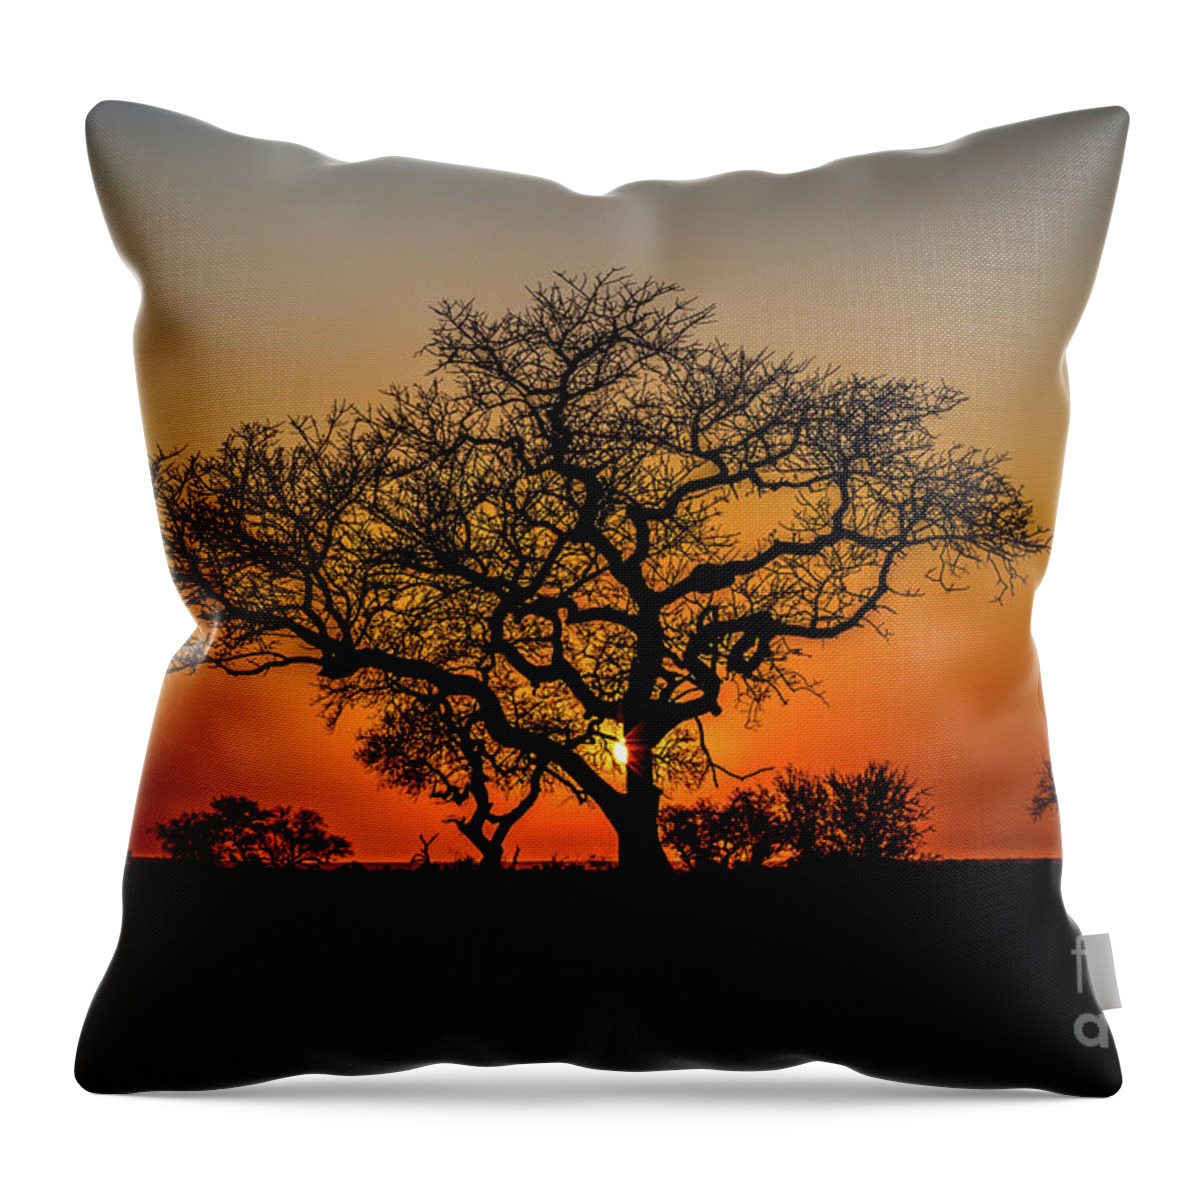 African Throw Pillow featuring the photograph Isimangaliso Wetland Park by Benny Marty